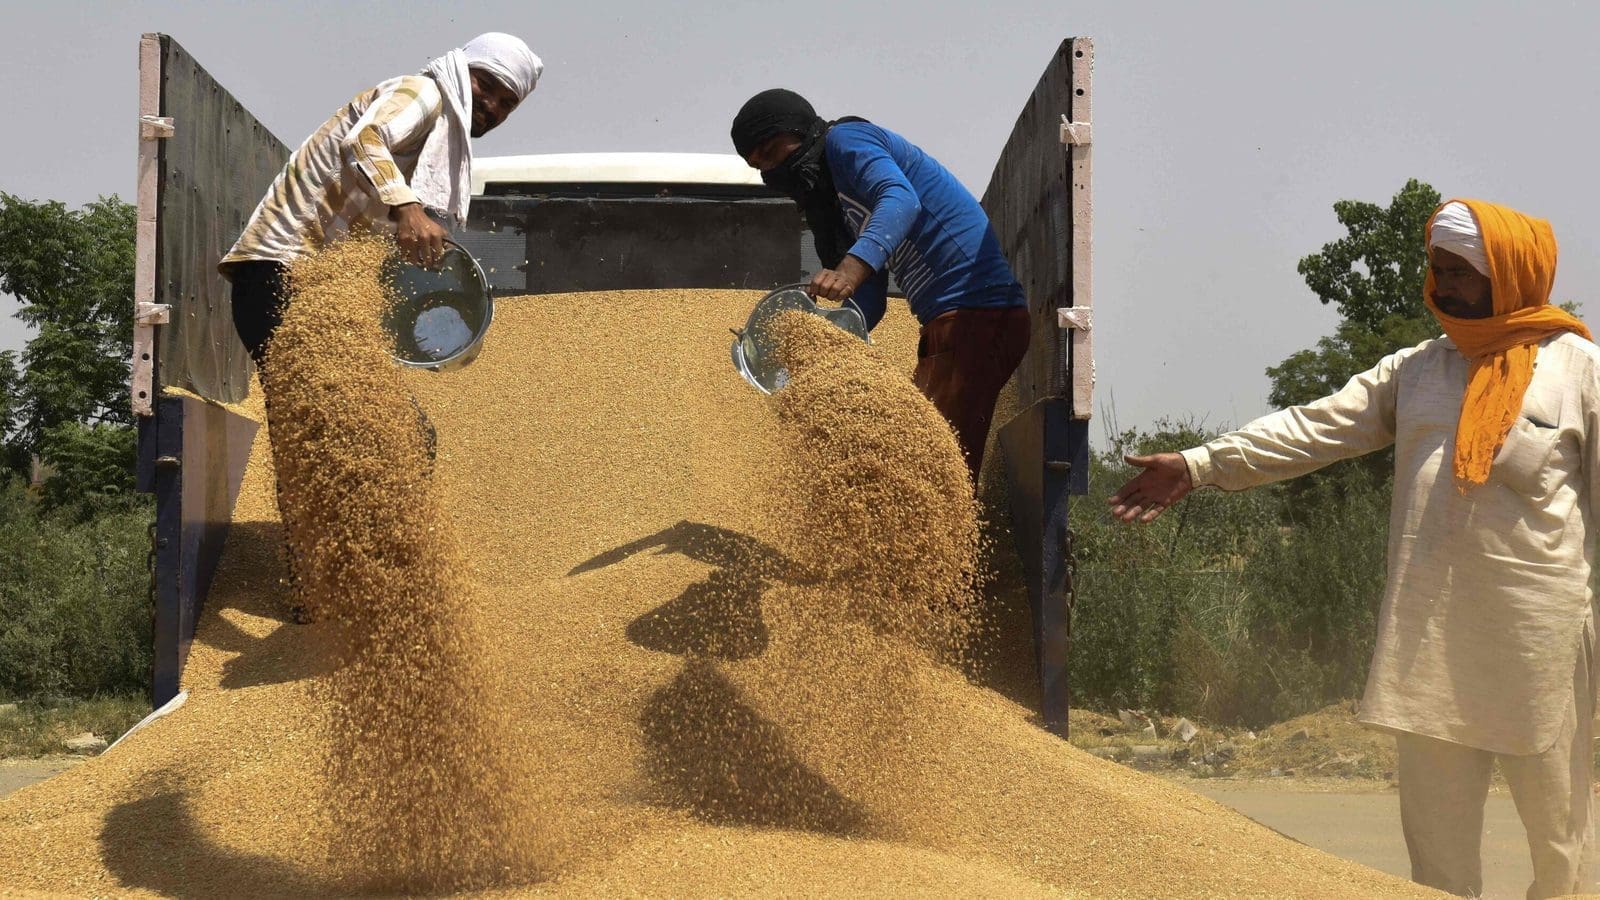 Jordan to buy 240,000 tonnes of barley and wheat to boost grain reserves